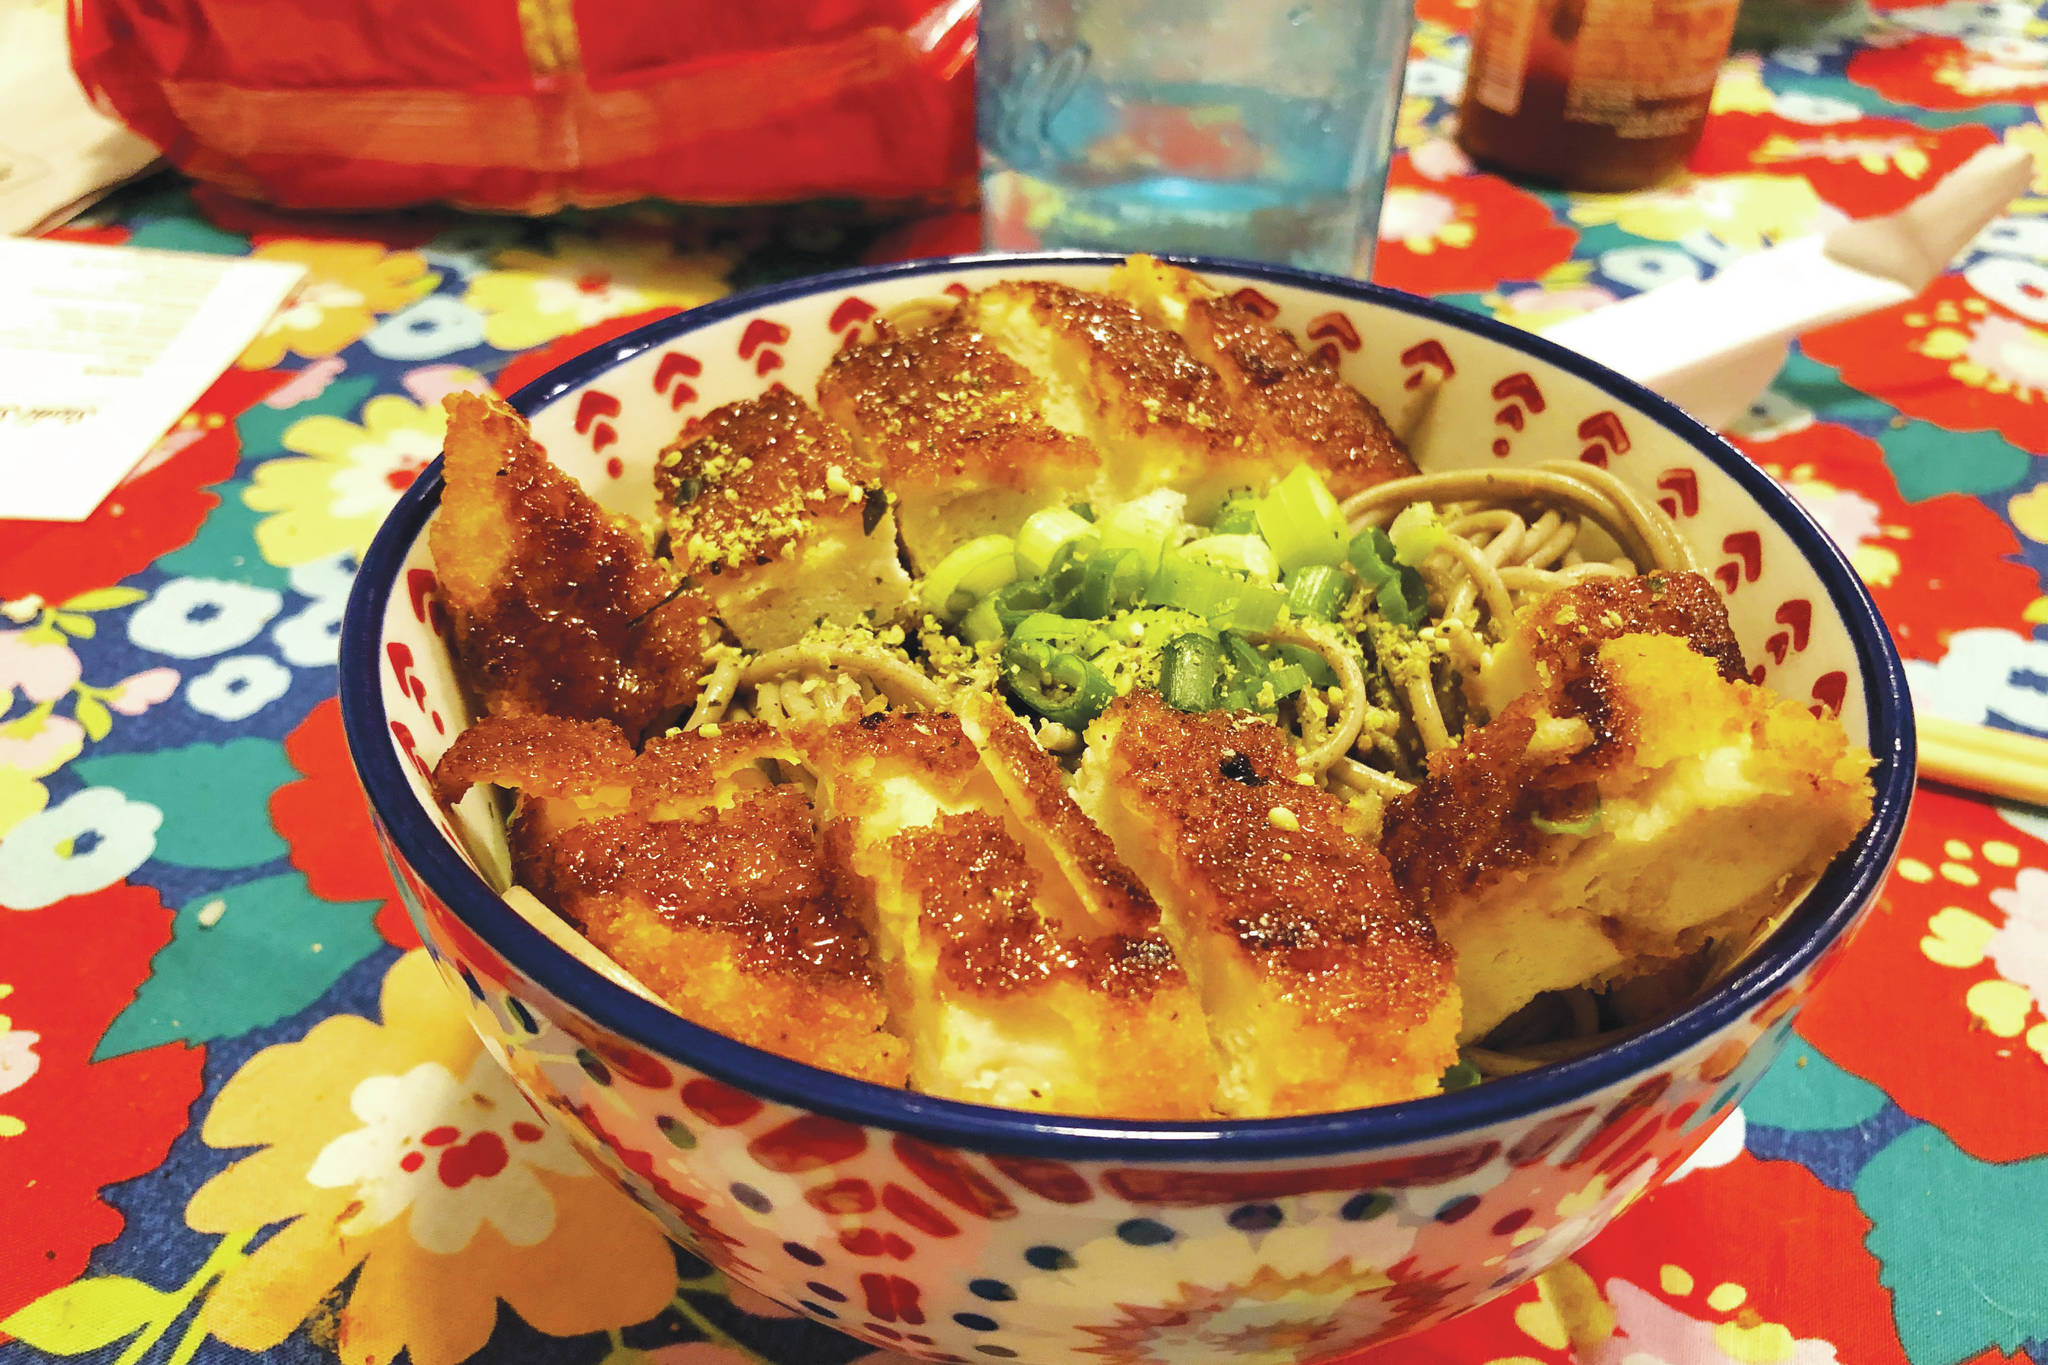 A chicken patty adds to a simple Japanese-cuisine-inspired noodle bowl, Jan. 15, 2021, in Anchorage, Alaska. (Photo by Victoria Petersen/Peninsula Clarion)